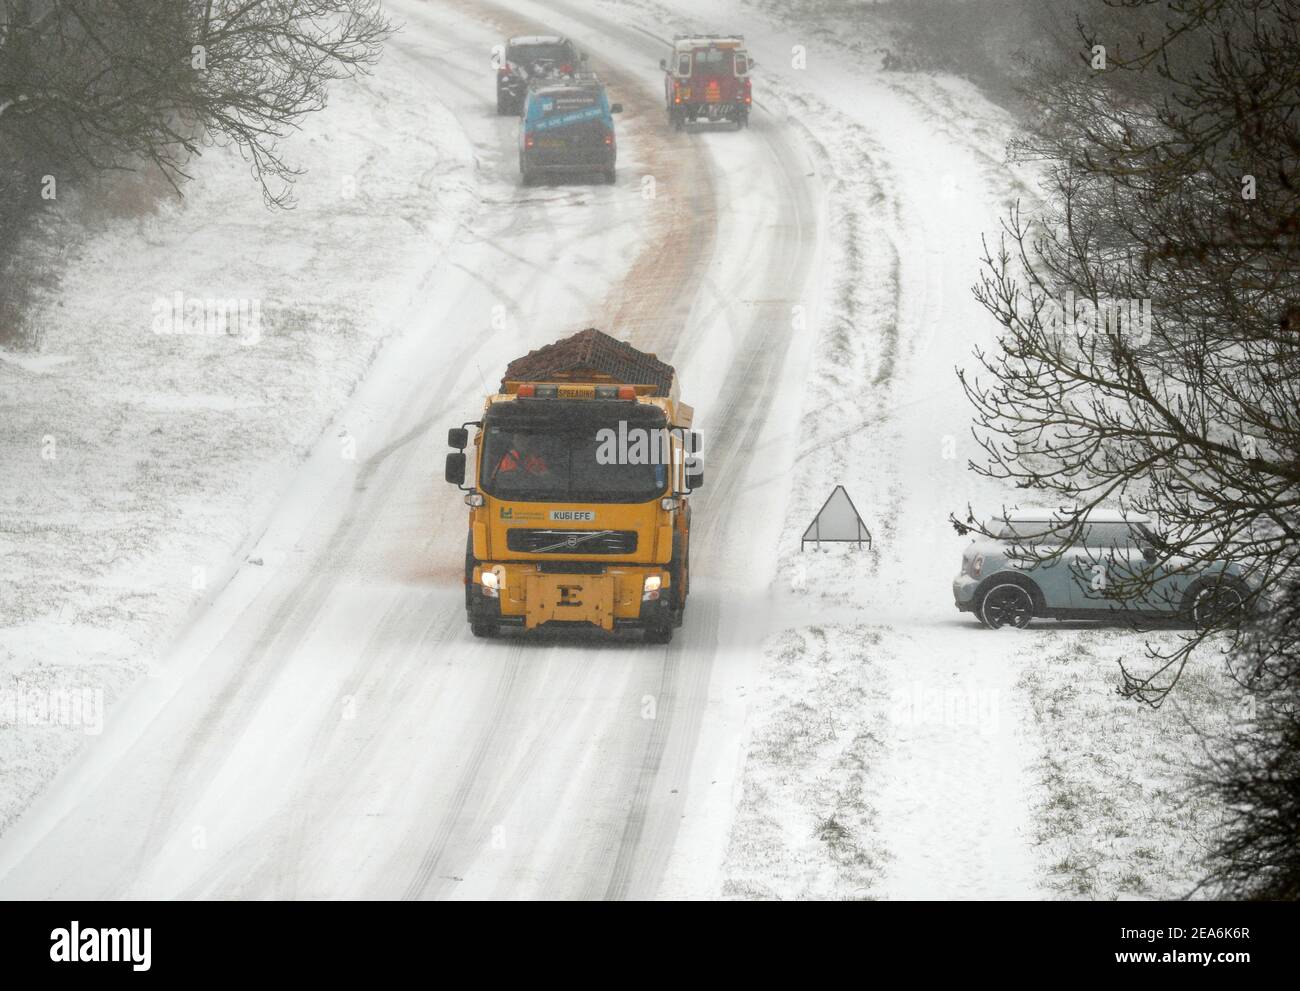 Uppingham, Rutland, UK. 8th February 2021. UK weather. A gritting lorry is driven past stranded motorists on a snow and ice covered hill. Credit Darren Staples/Alamy Live News. Stock Photo